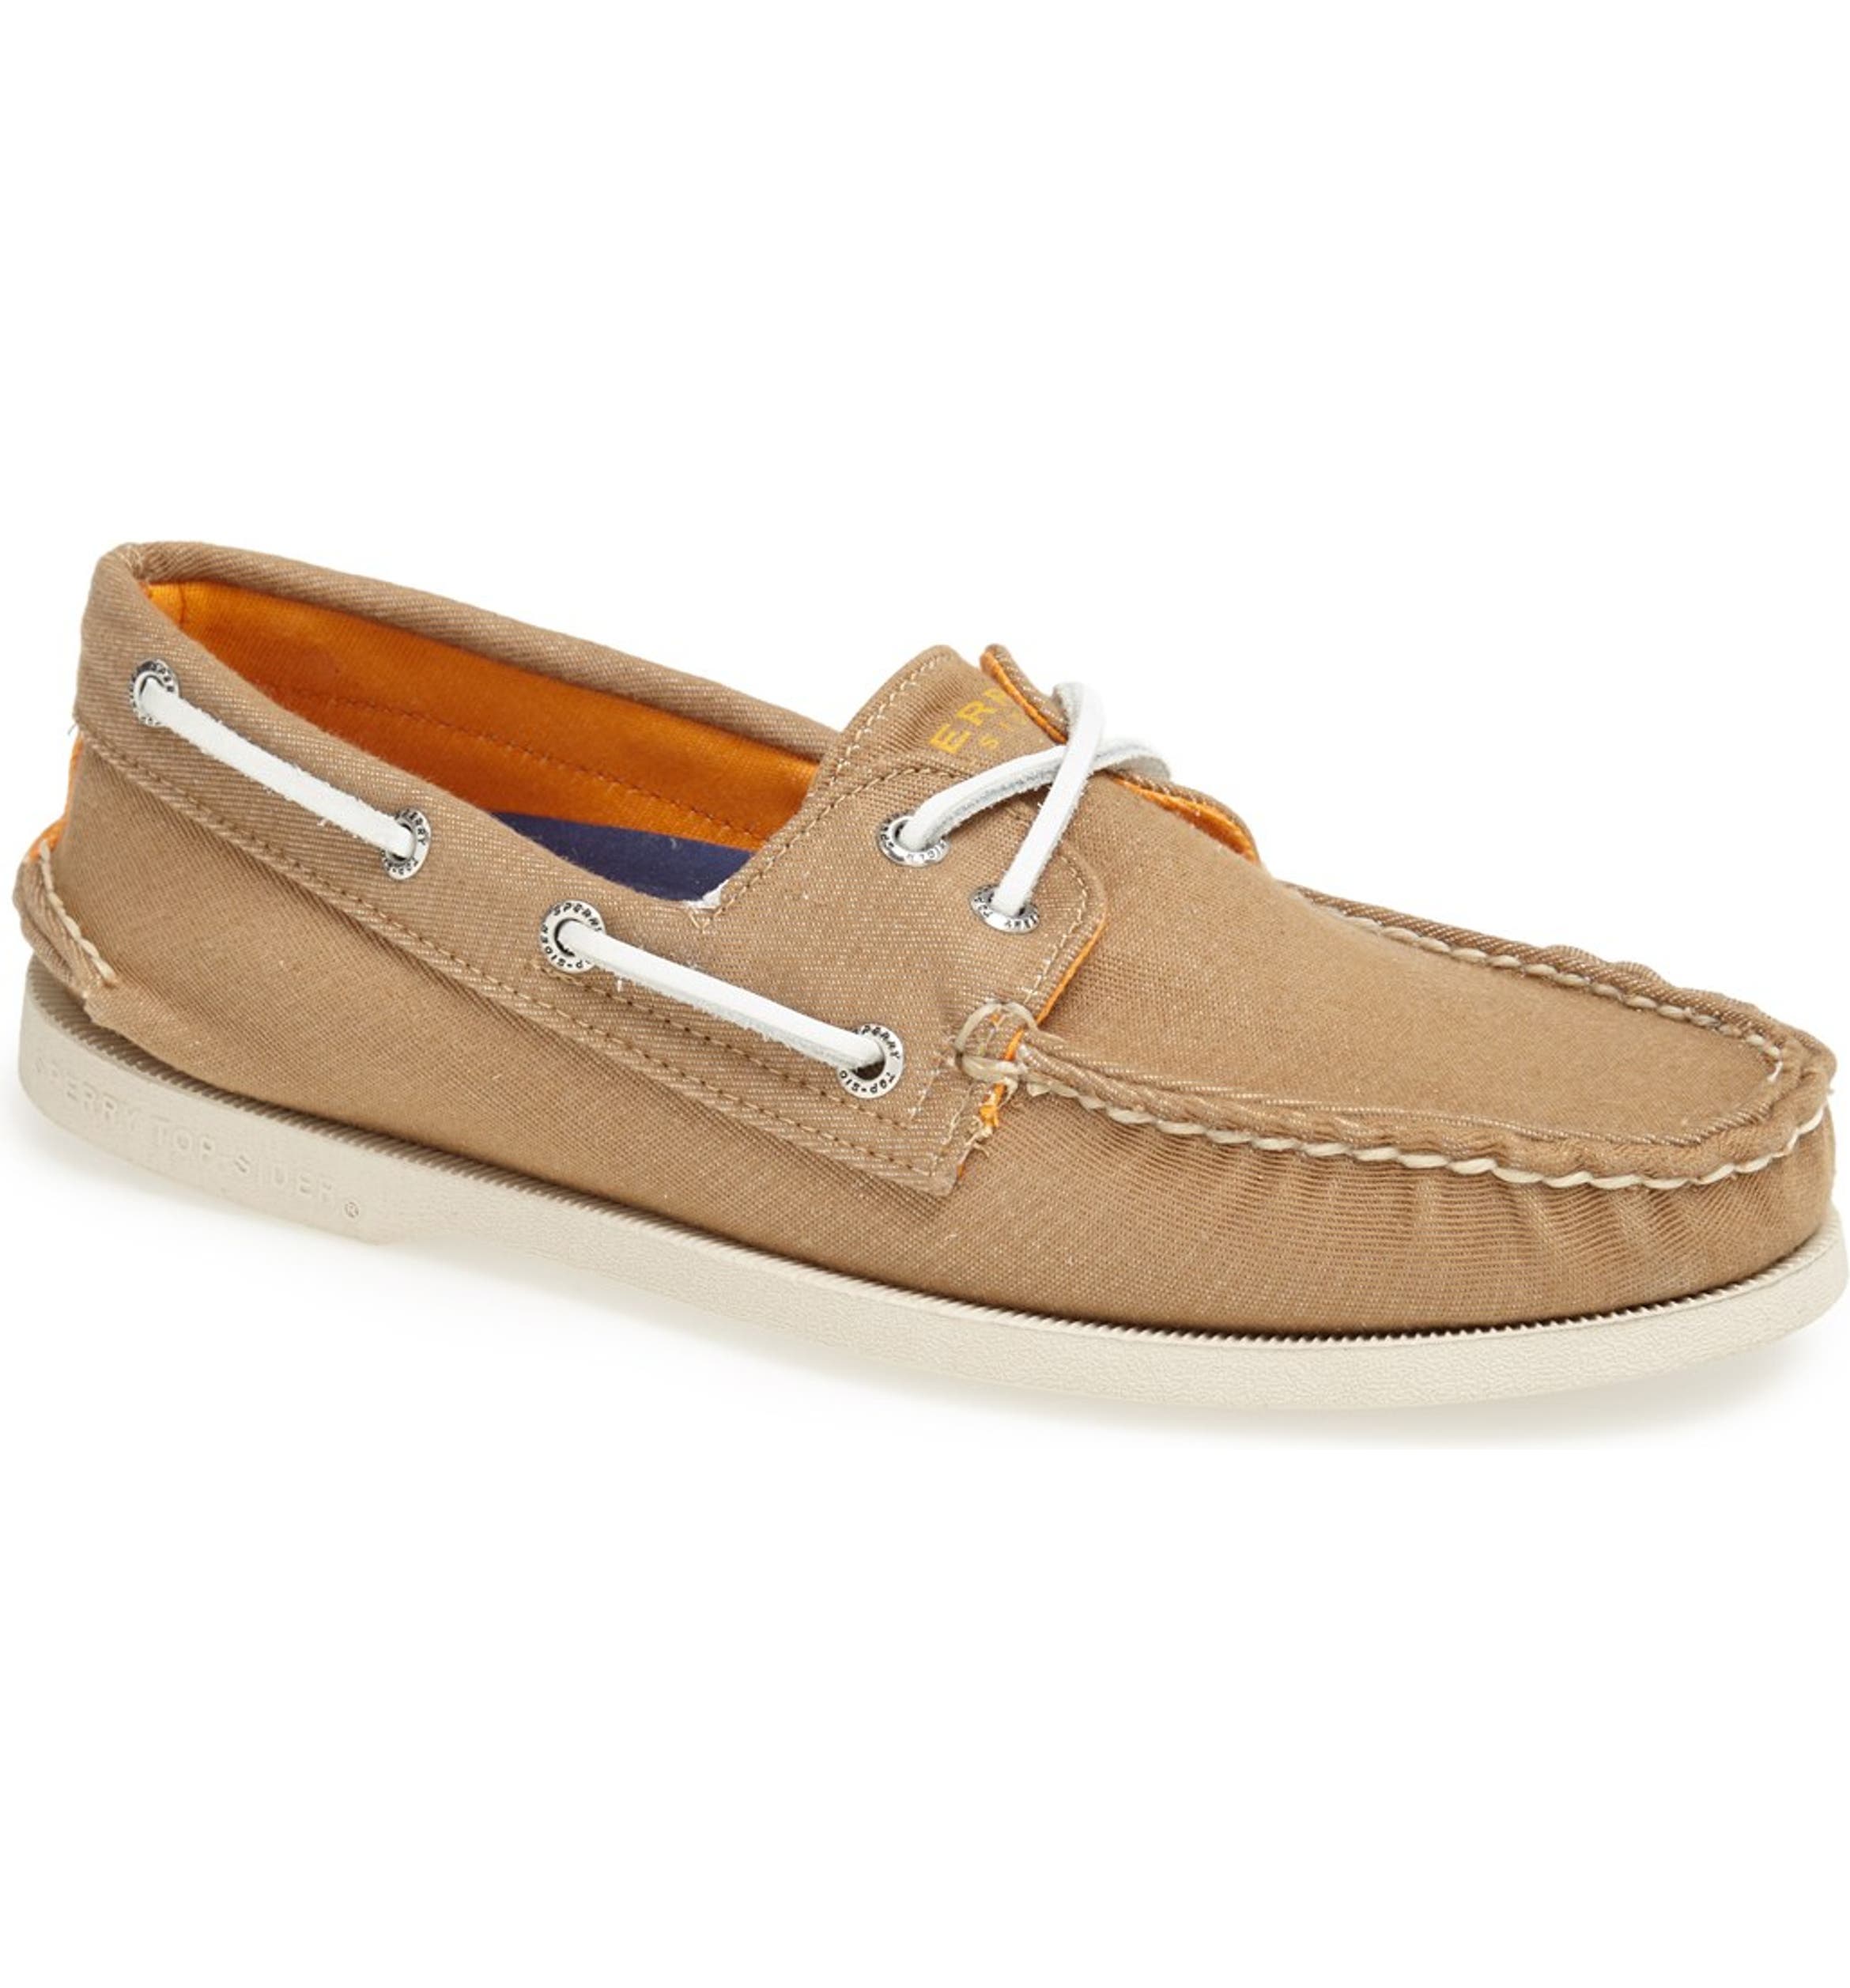 Sperry Top-Sider® 'Authentic Original' Boat Shoe | Nordstrom